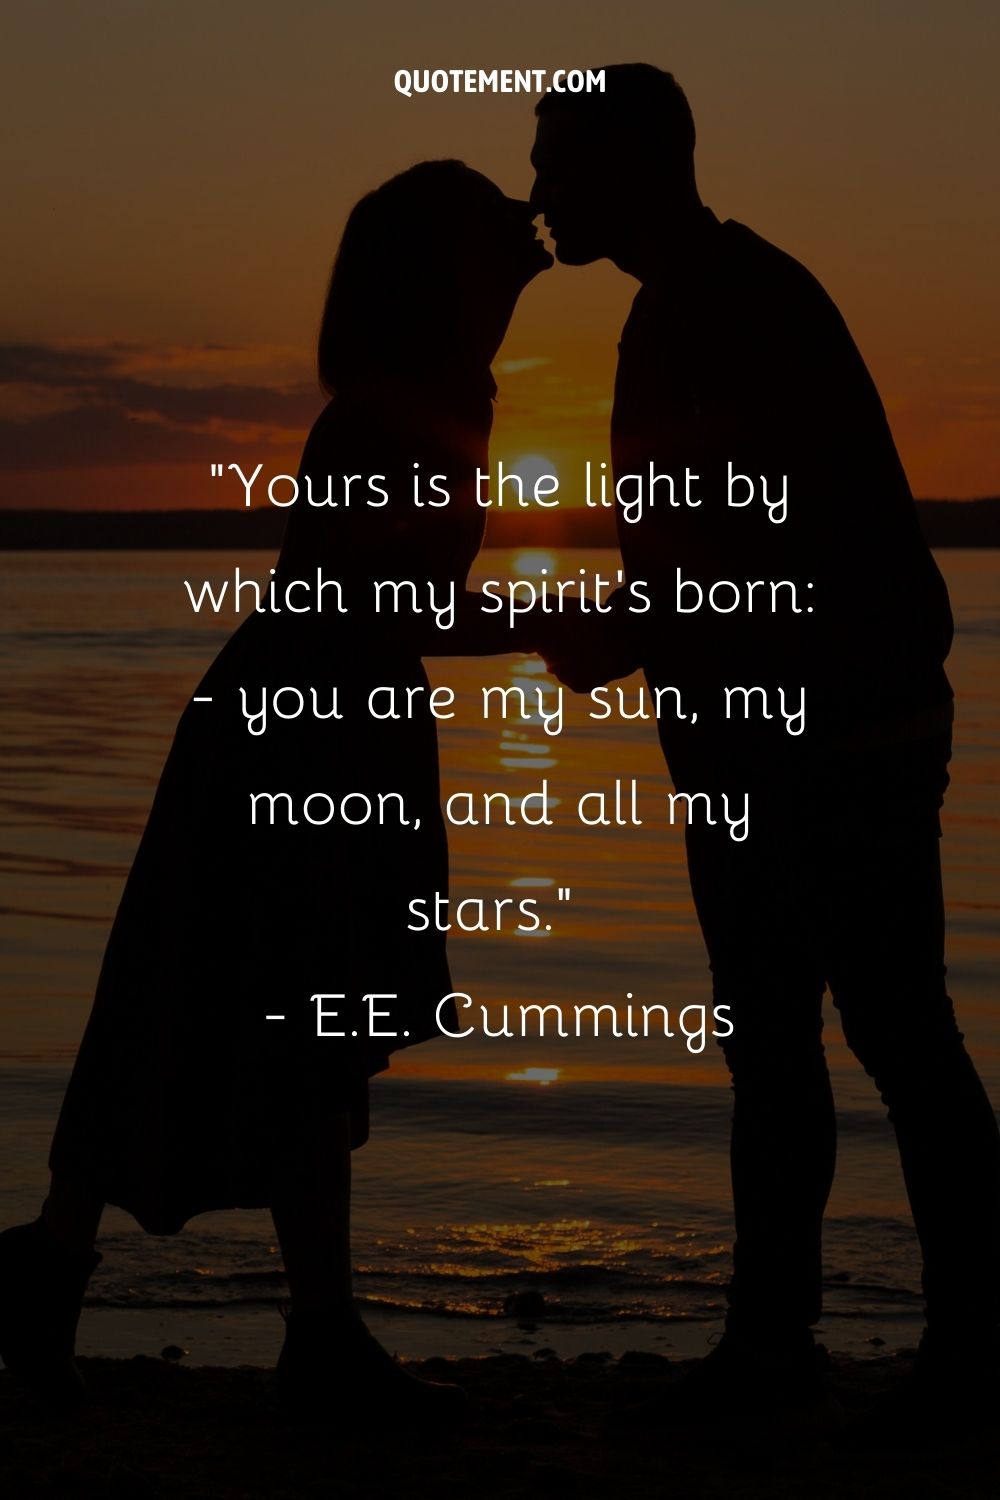 Yours is the light by which my spirit's born - you are my sun, my moon, and all my stars